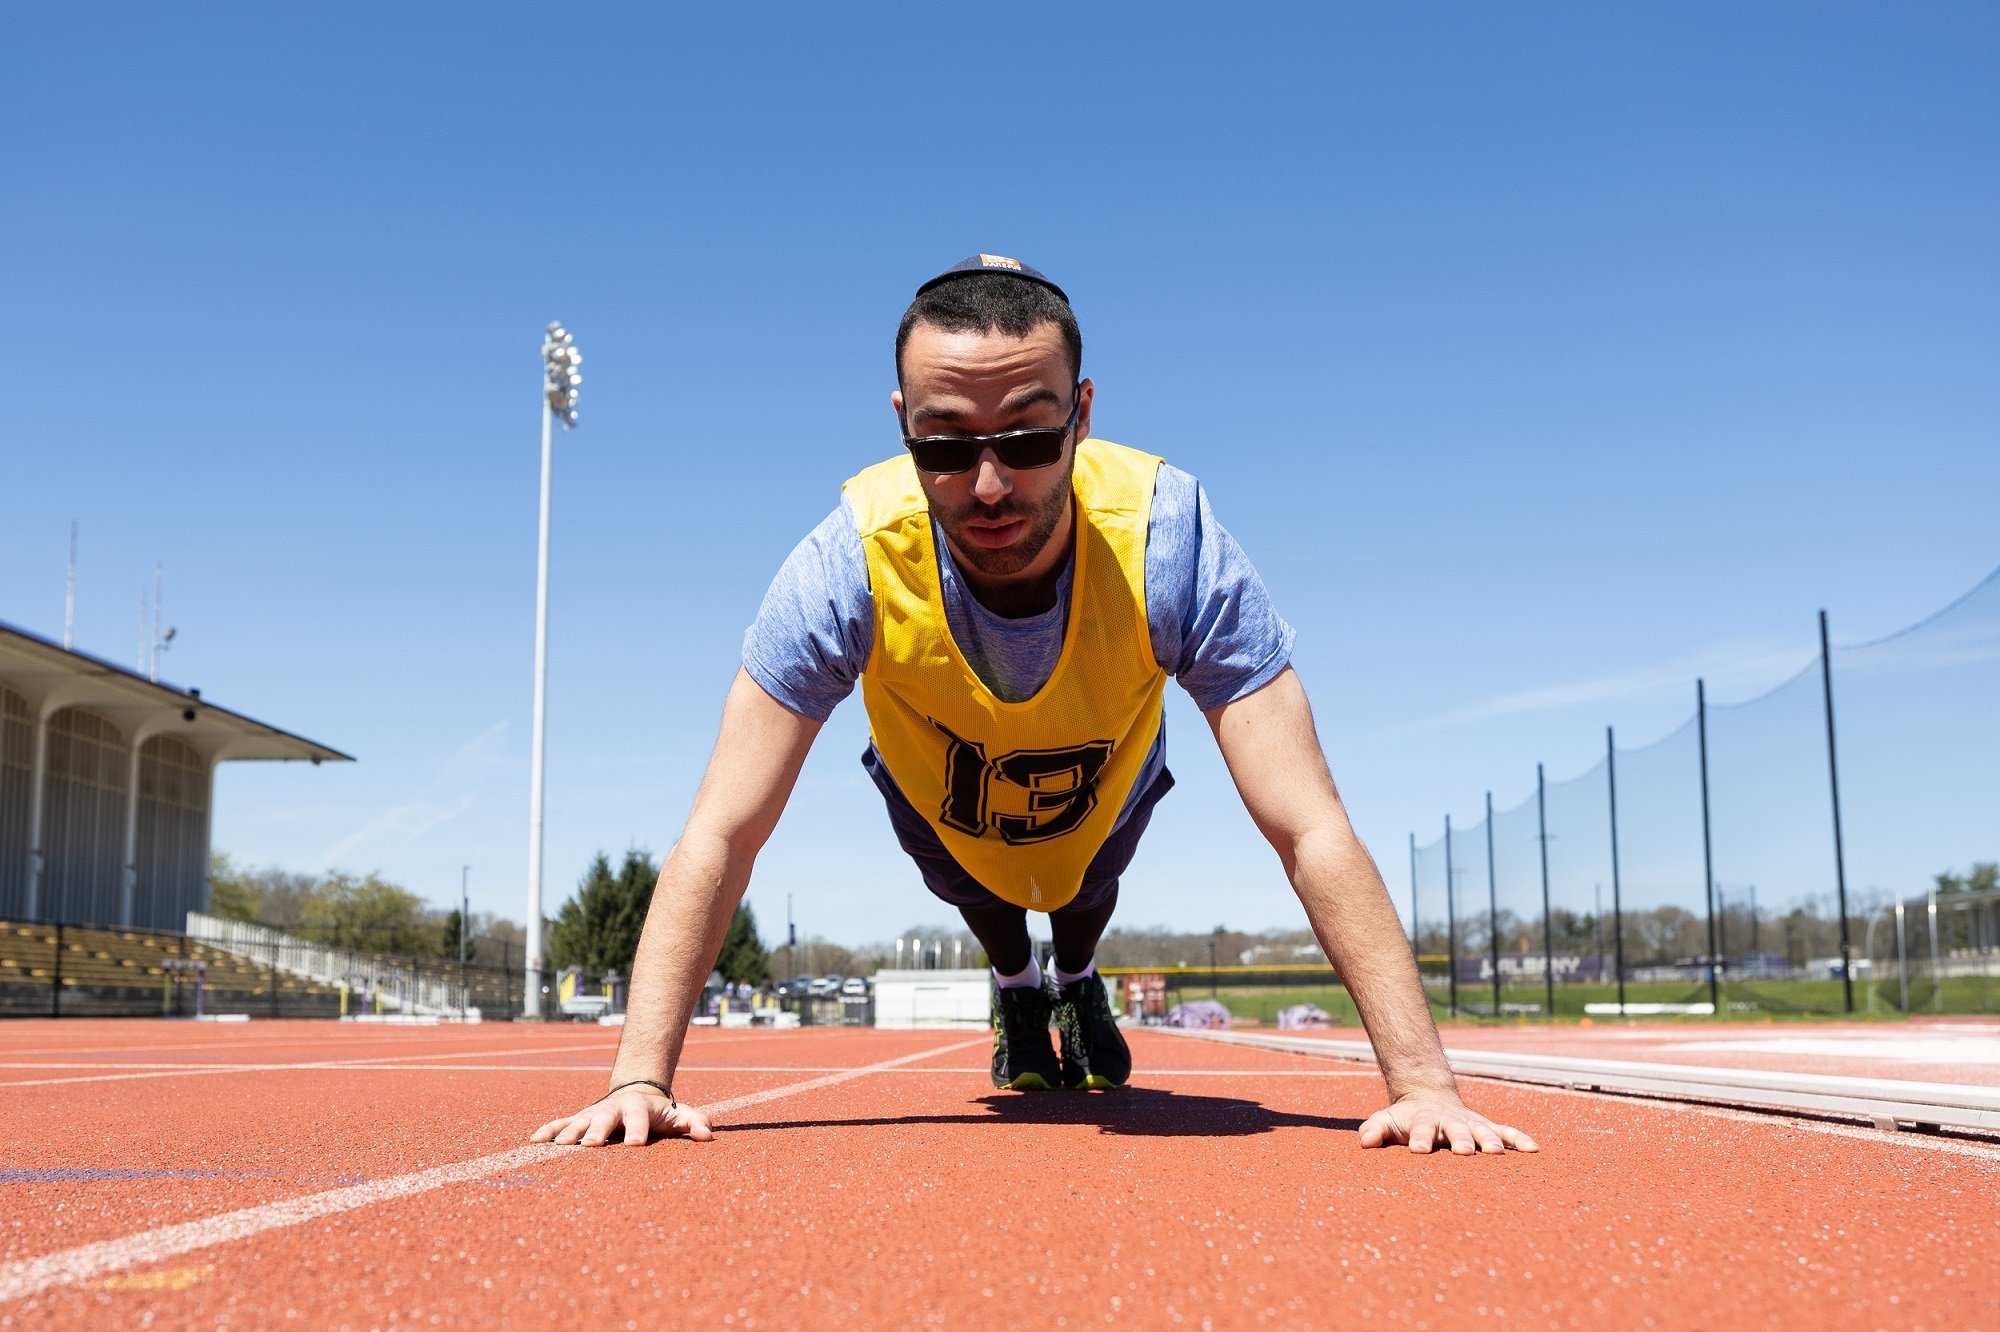 A student prepares for a push up during the physical fitness test at UAlbany.